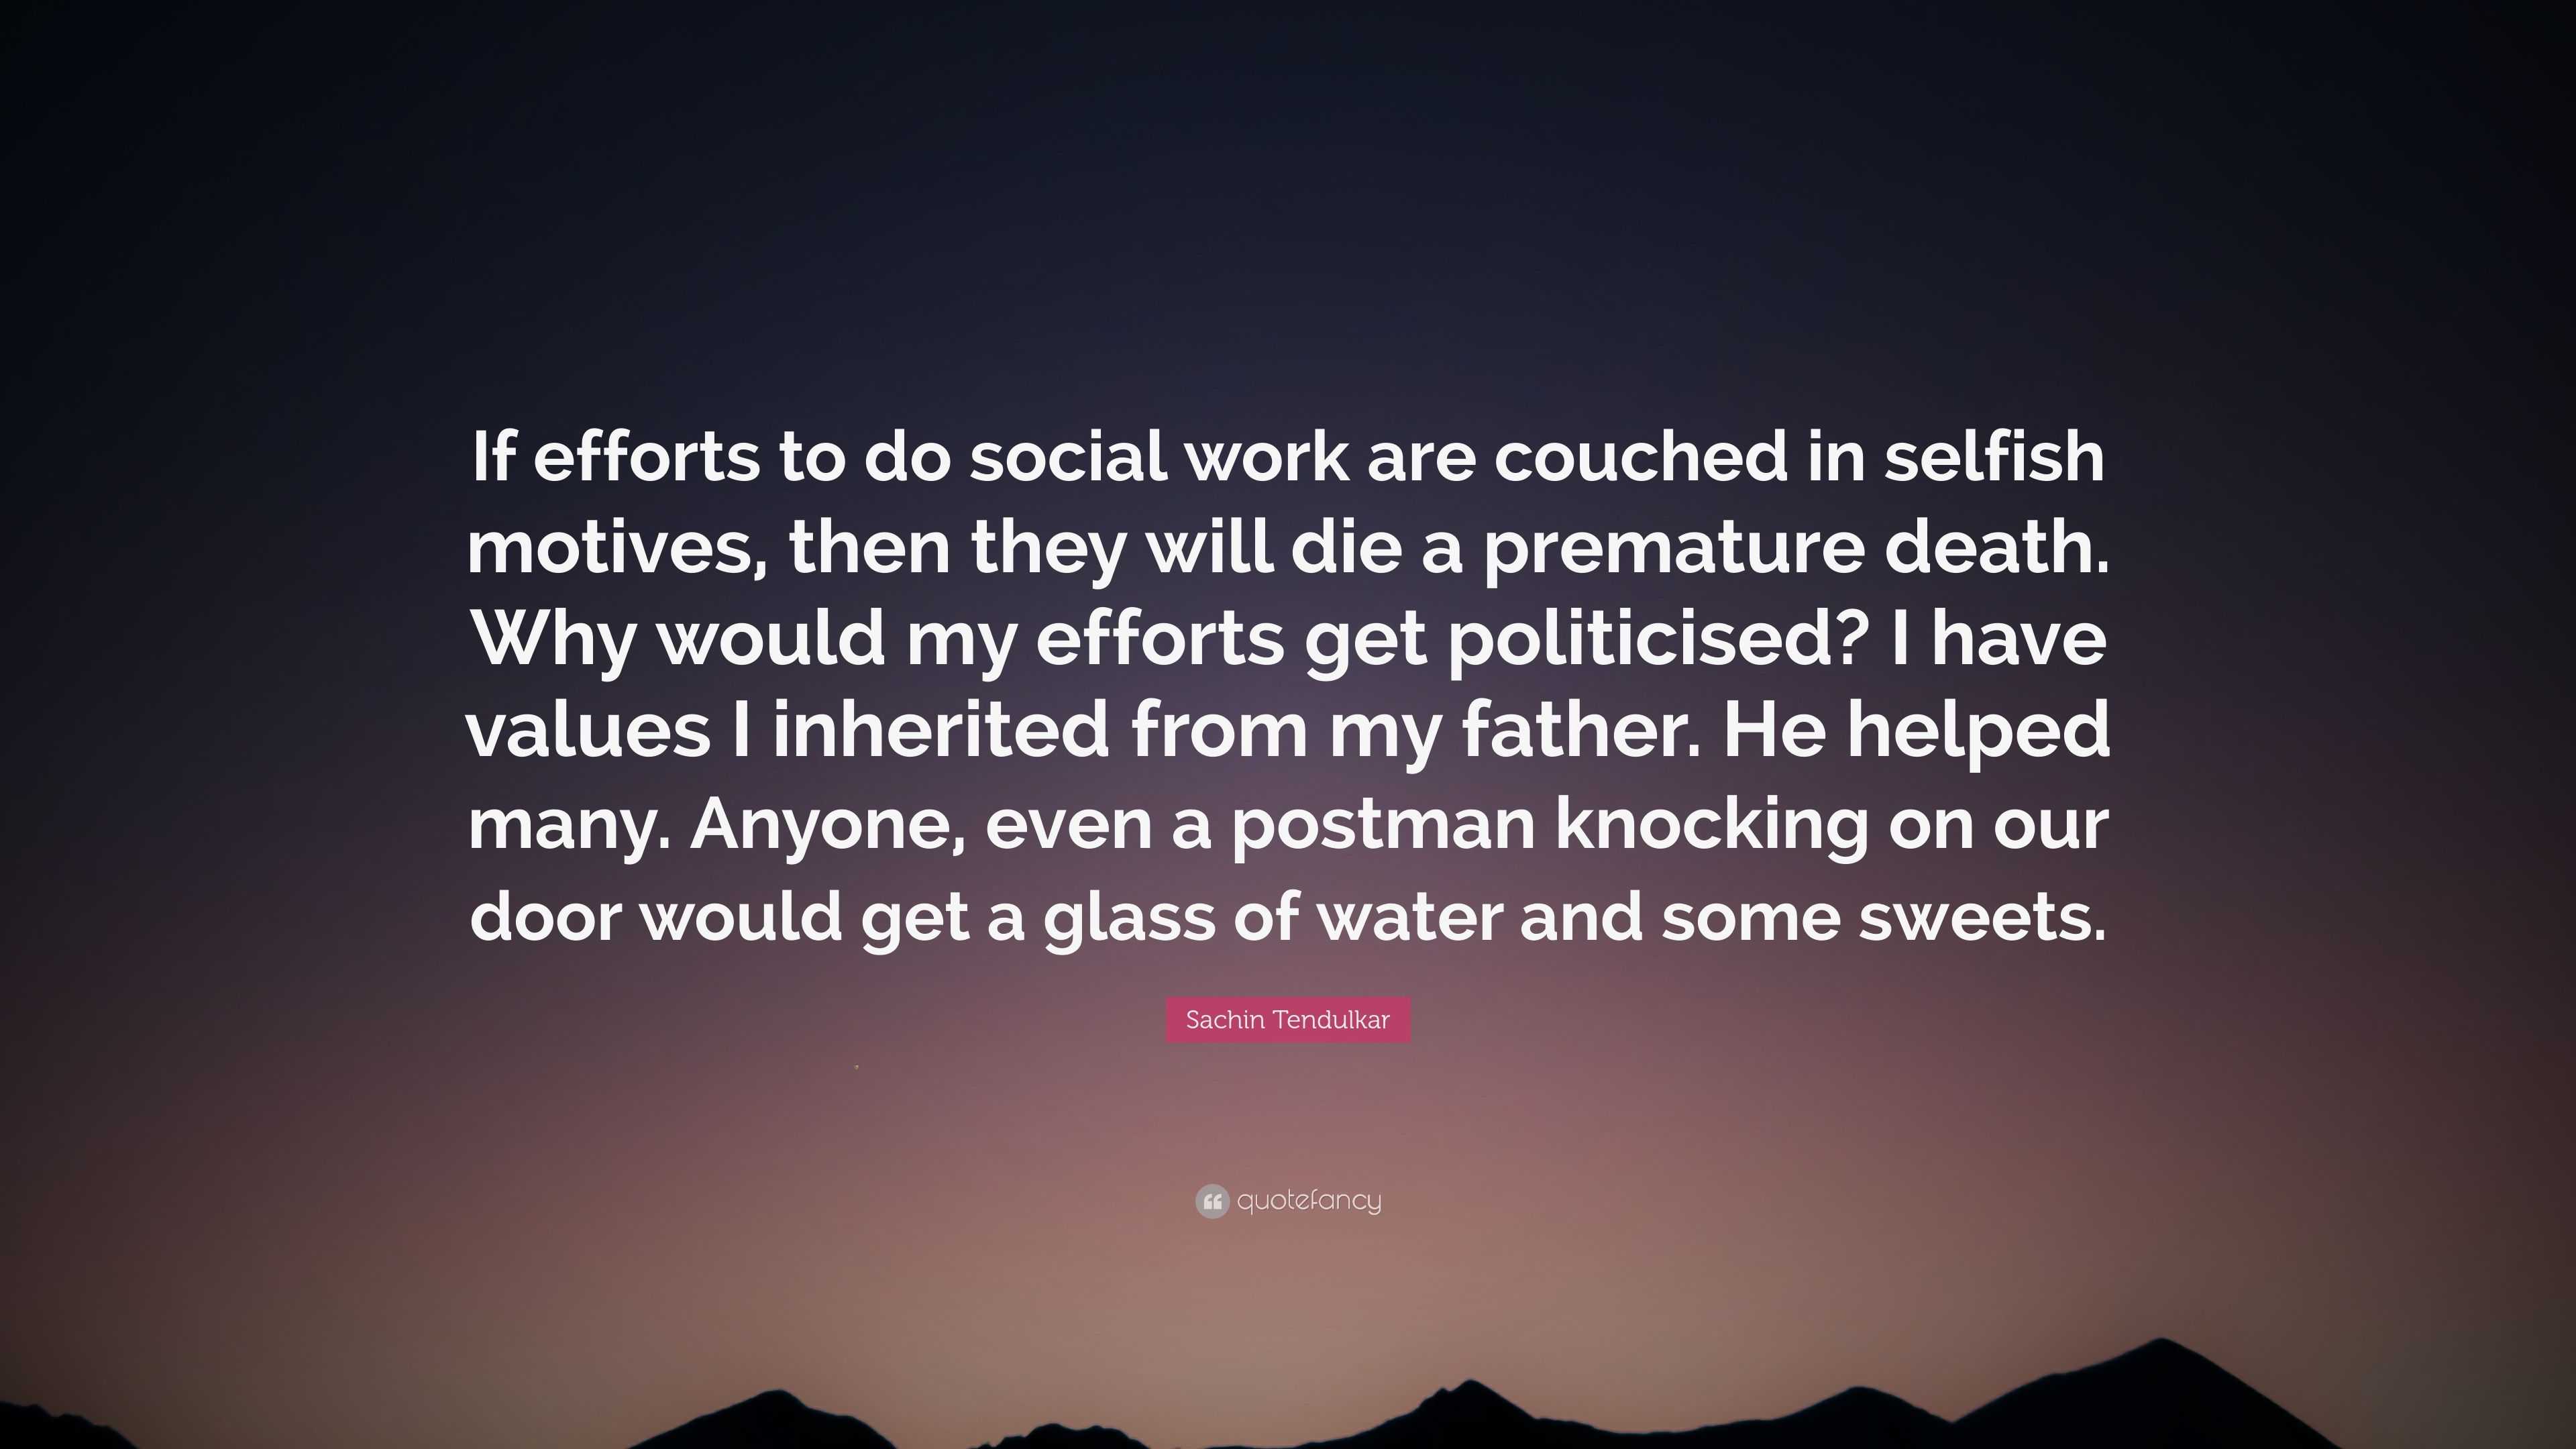 Sachin Tendulkar Quote: “If efforts to do social work are couched in